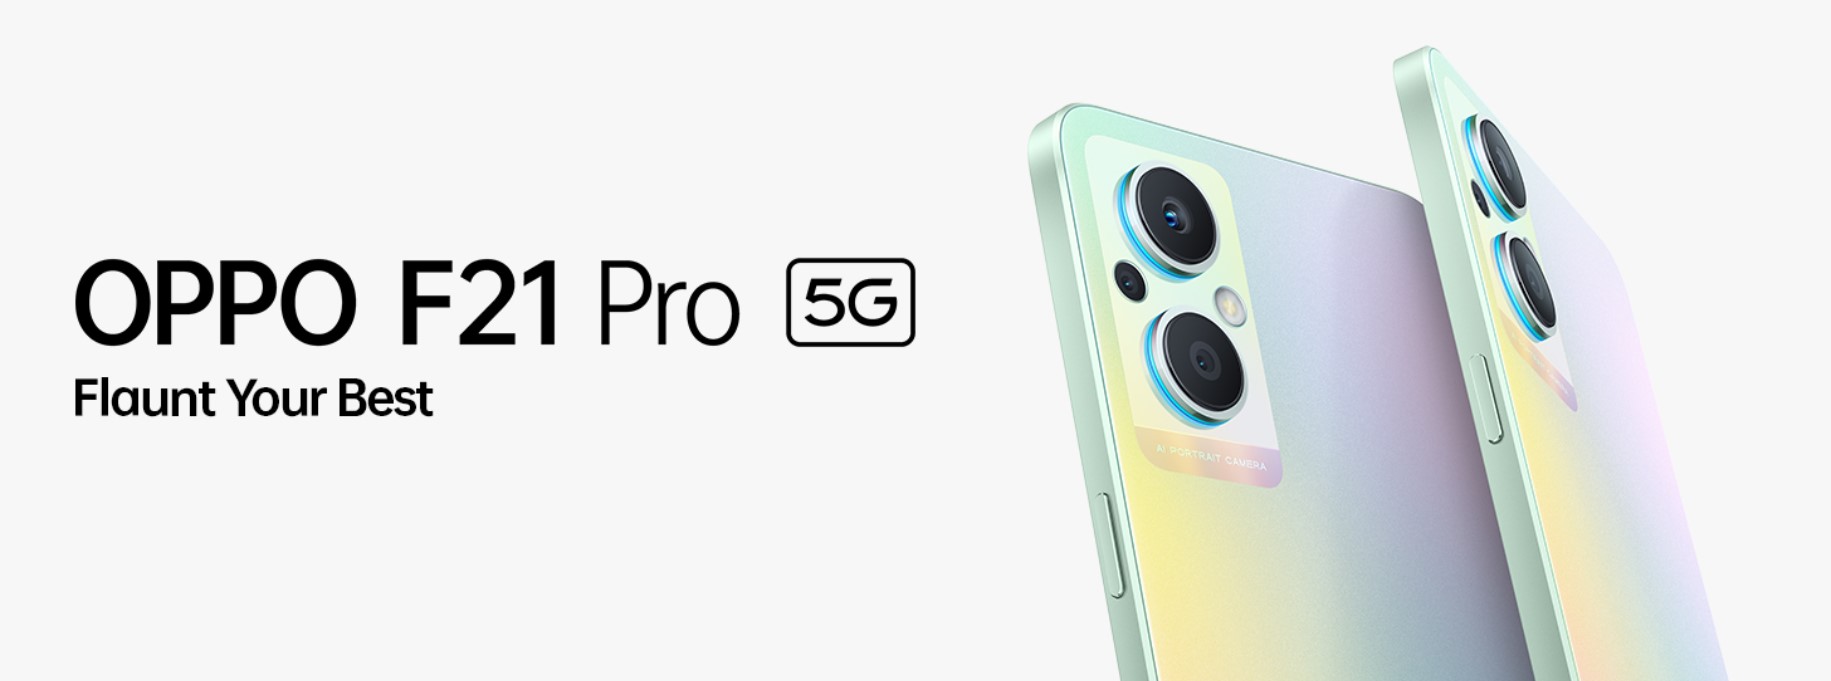 Oppo F21 Pro 5G - best camera 5g phone in India under 30000